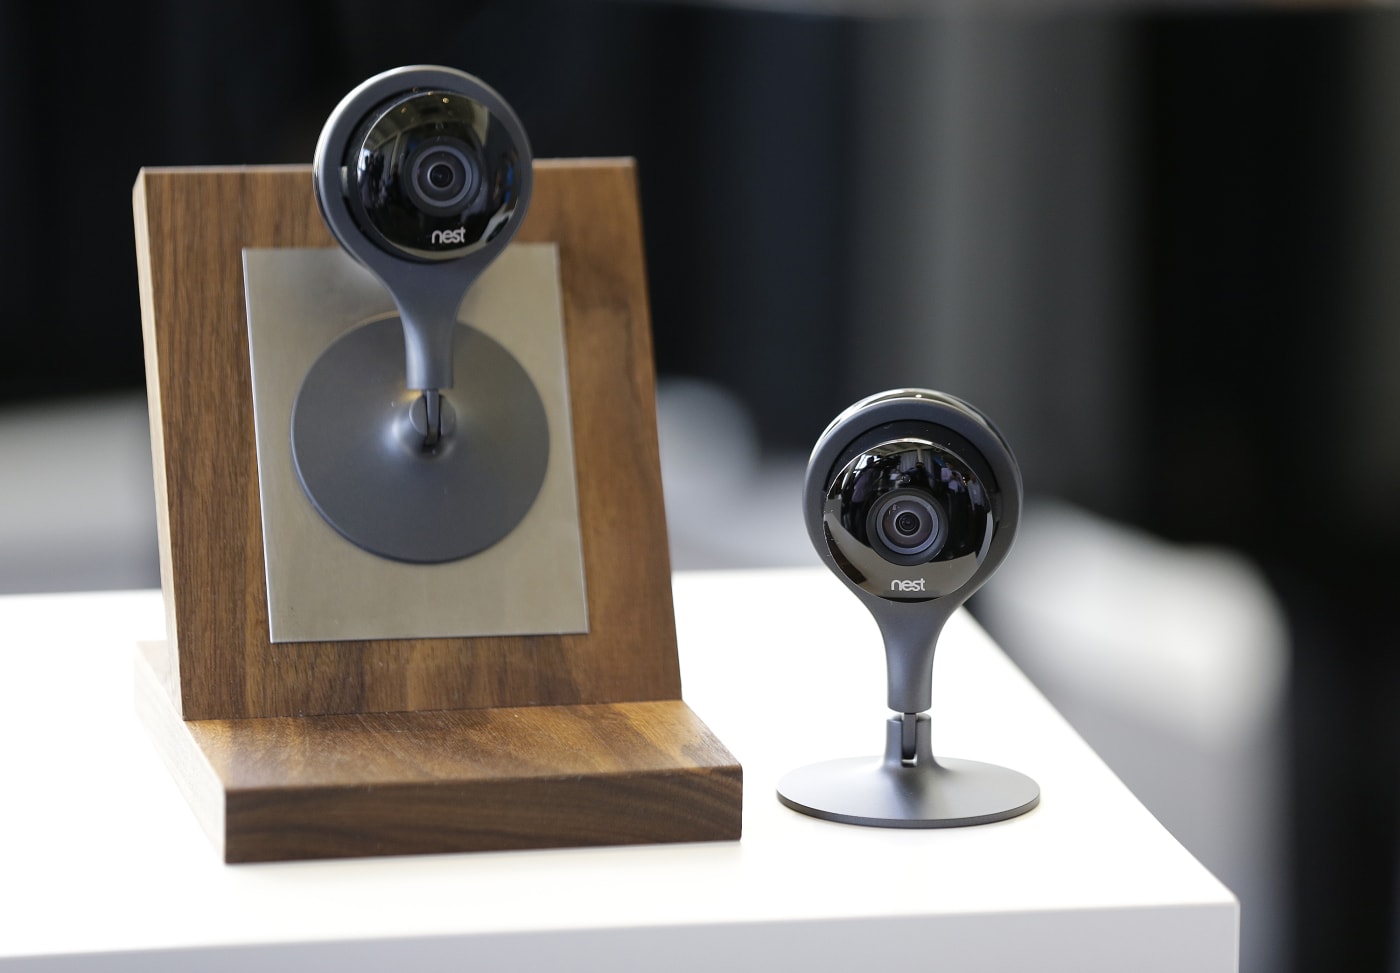 Nest is reportedly working on an outdoor security camera